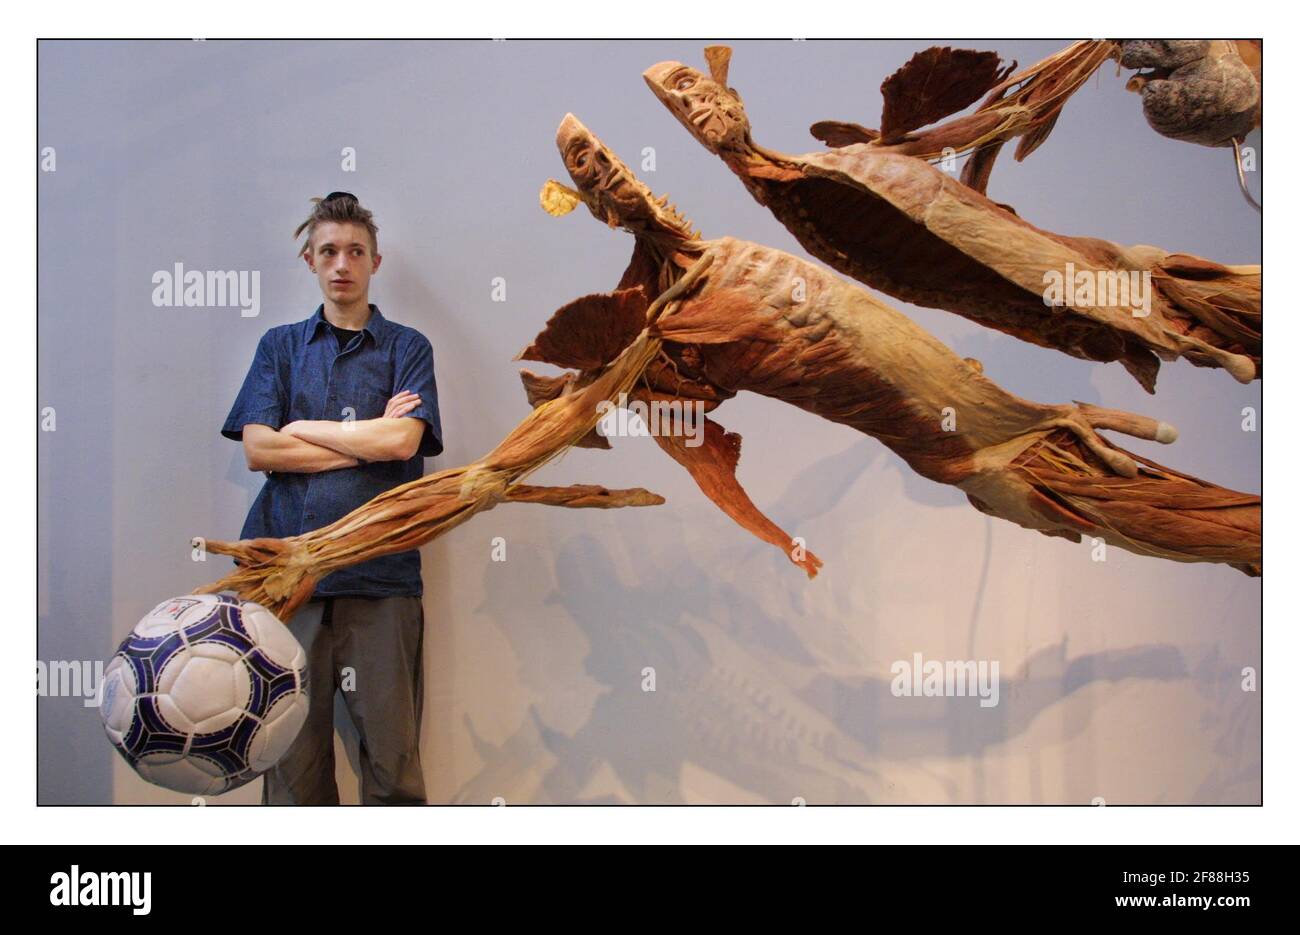 Bodyworlds......Members of the public who have agreed to donate their bodies to be plastinated by Gunther von Hagens inventor of the plastination process.Colin Hill (17) student from Leeds. pic David Sandison 12/8/2002 Stock Photo